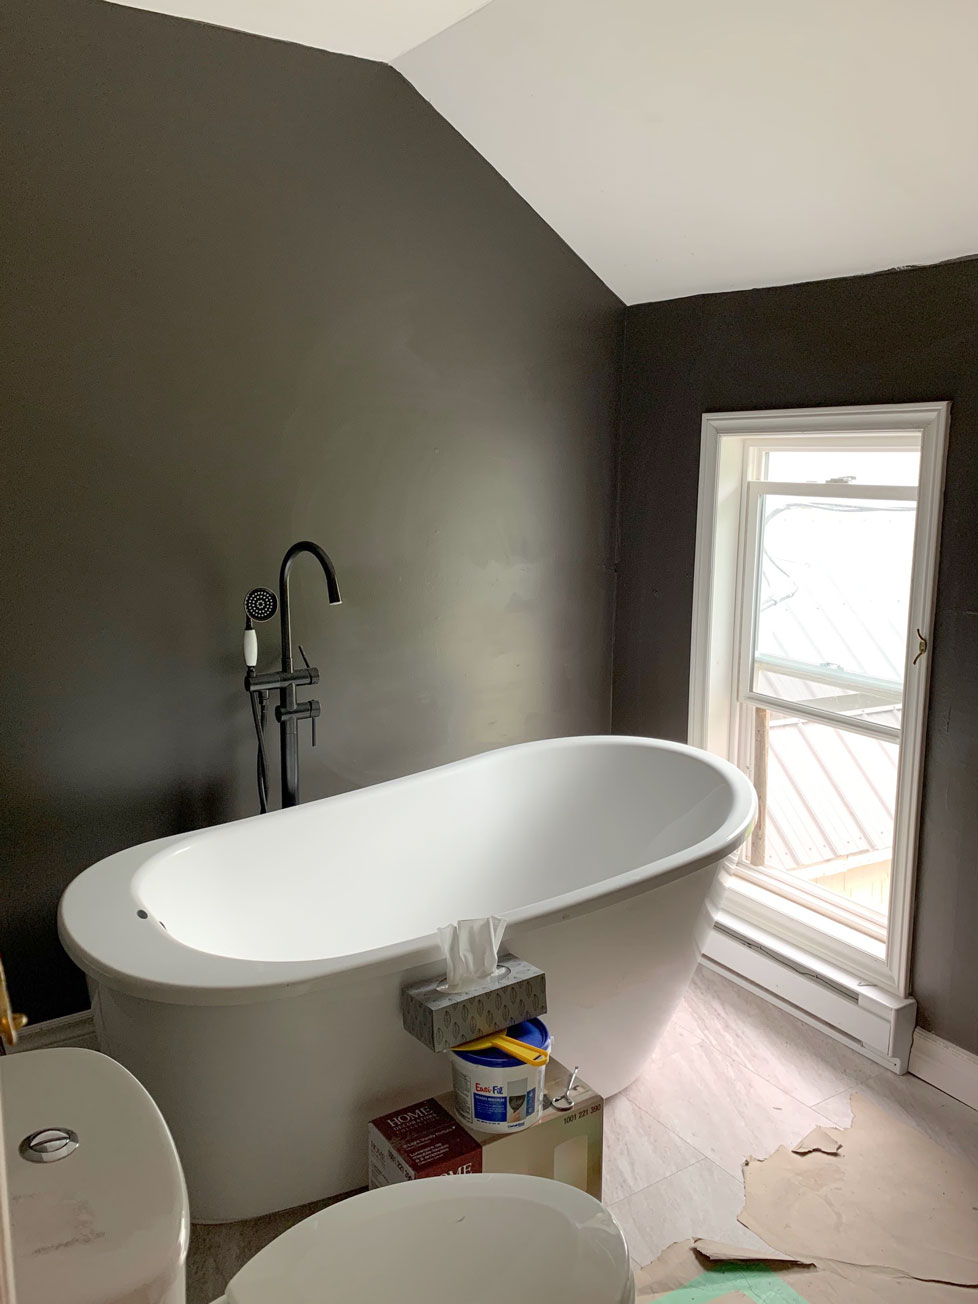 HRS installed a large new soaker tub in renovated bathroom